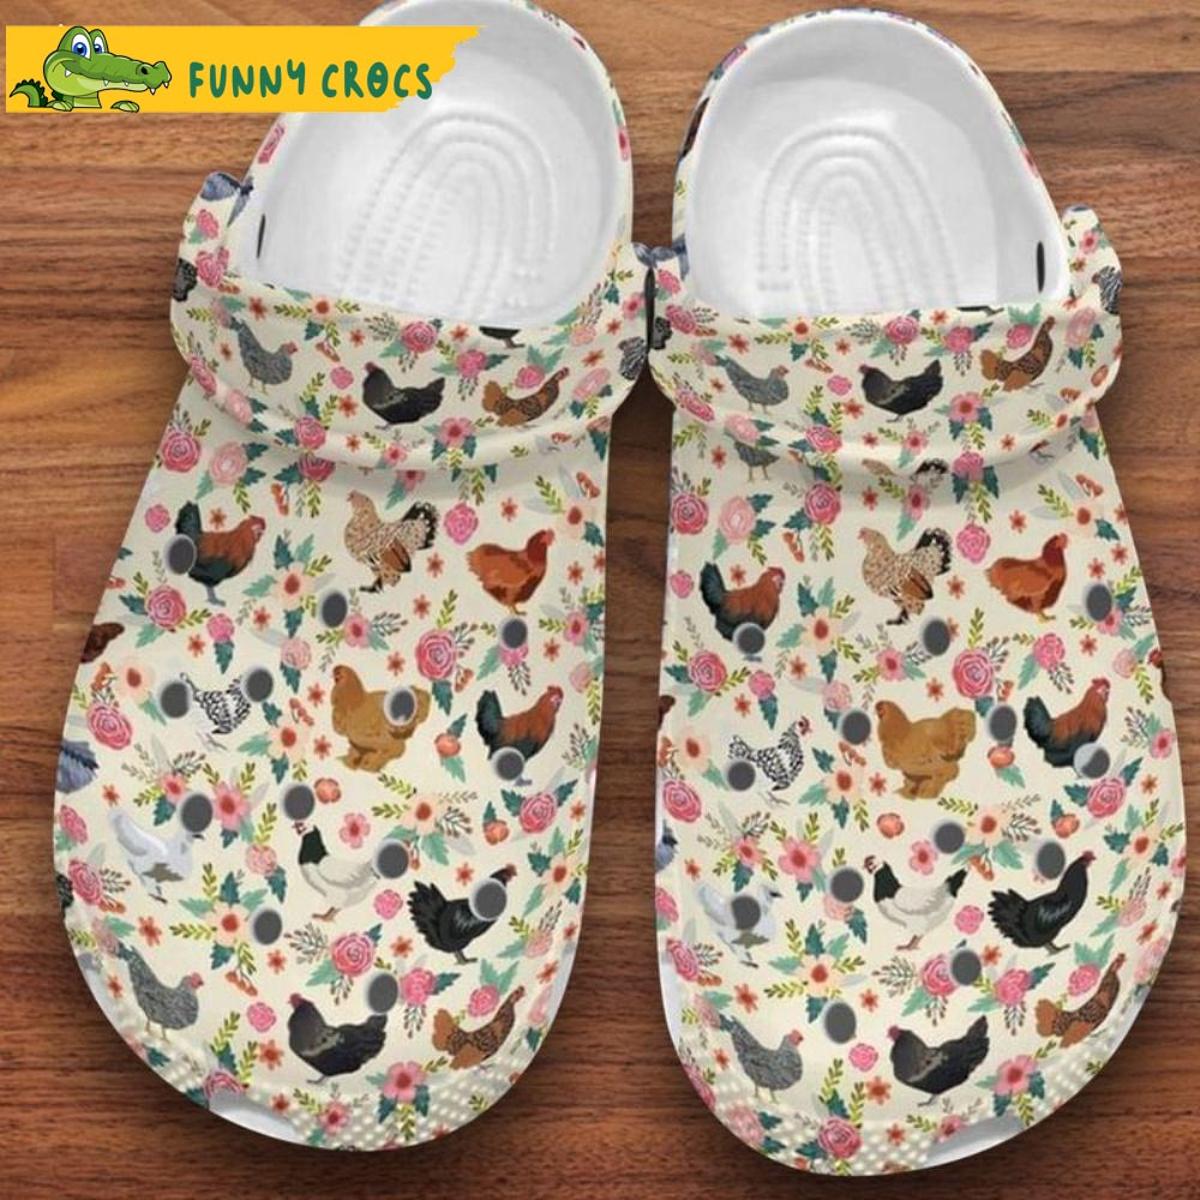 Chicken Knowledge Crocs Clog Shoes